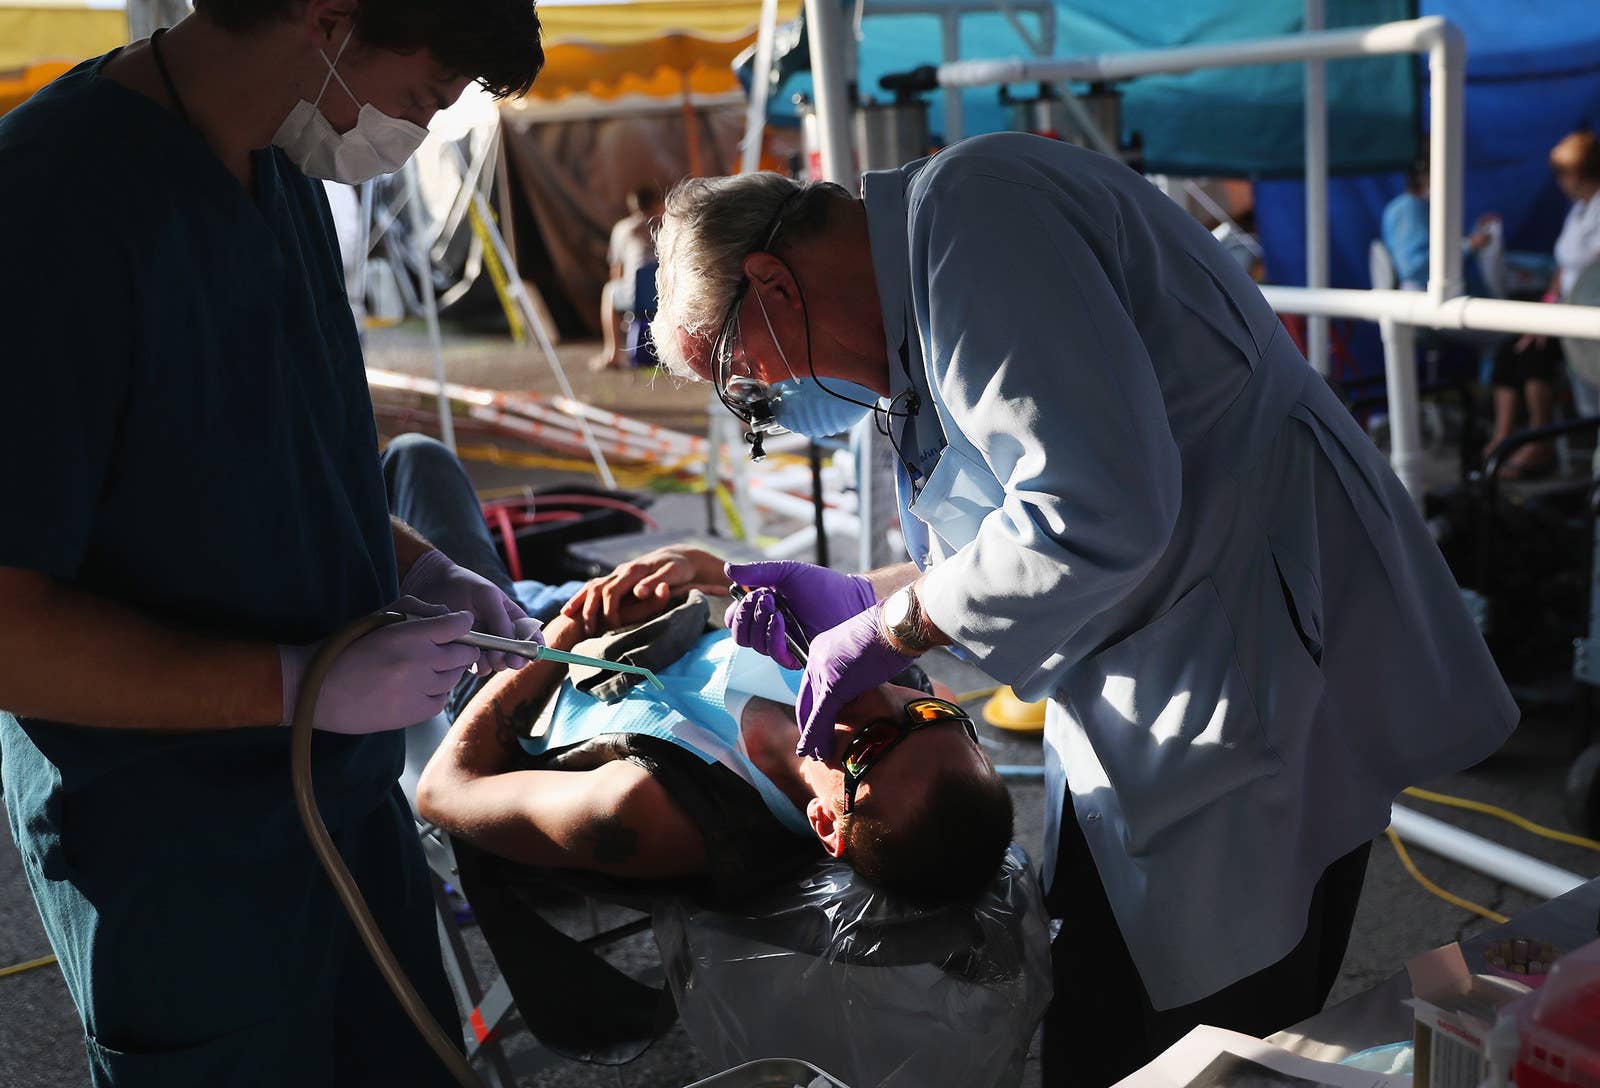 A patient receives medical care from onsite dentists in Wise on July 21.